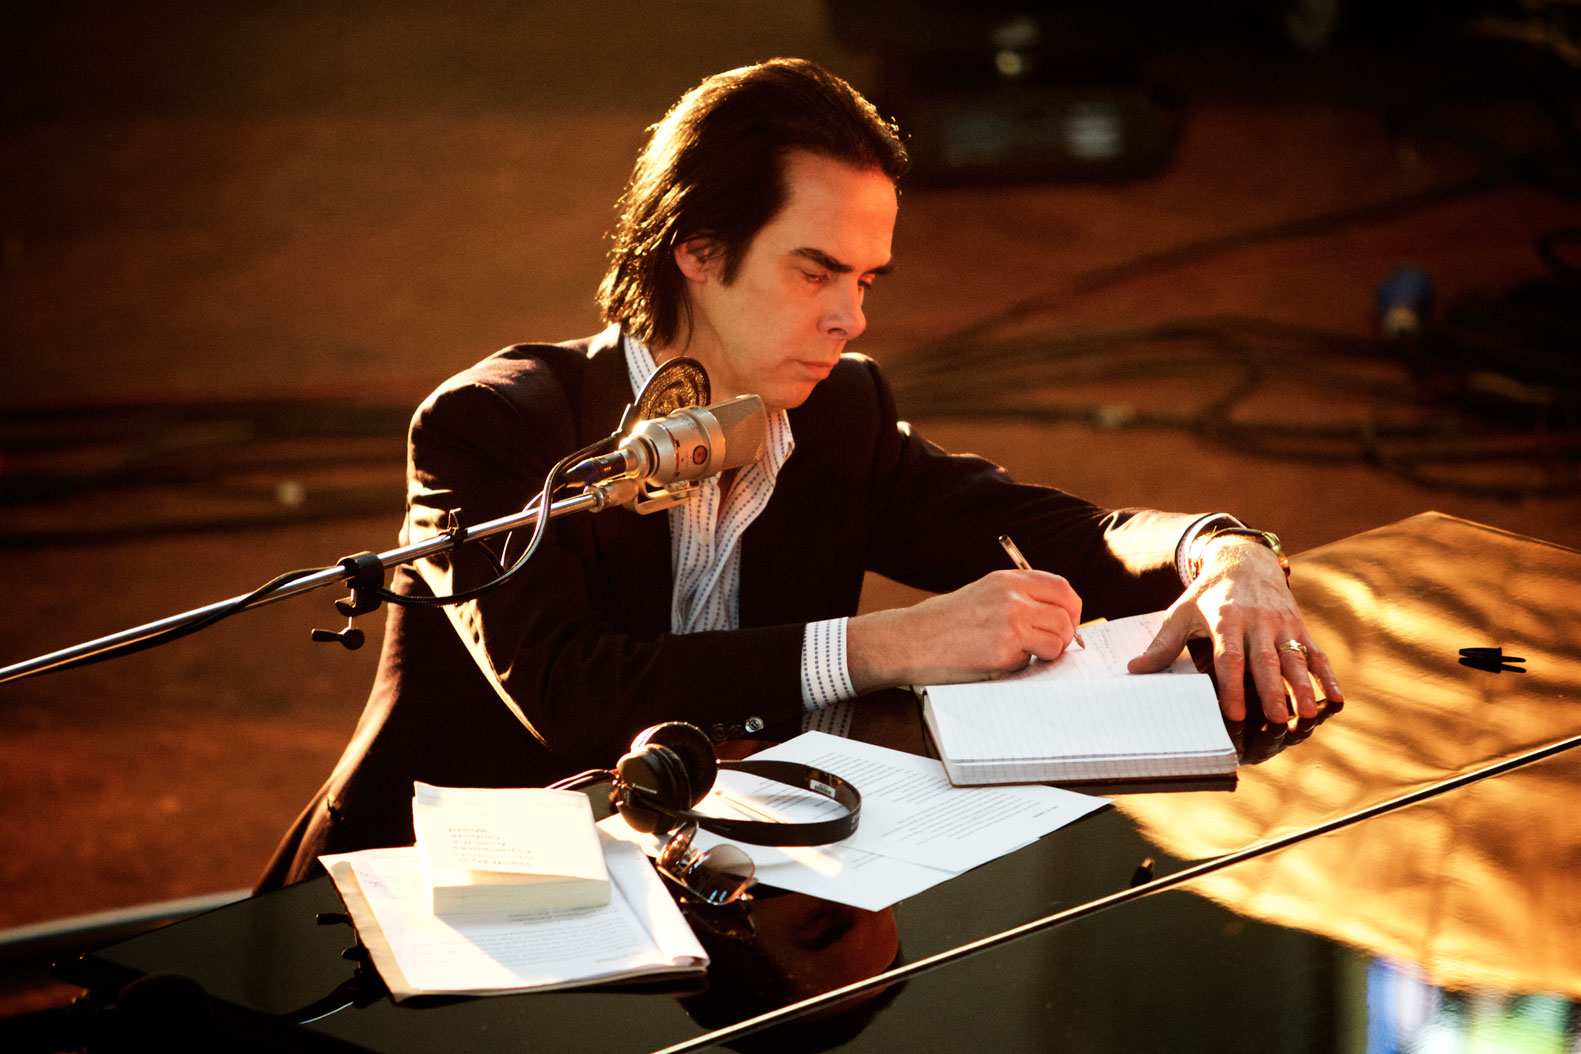 Nick Cave’s #1 threatened by Suicide Squad soundtrack